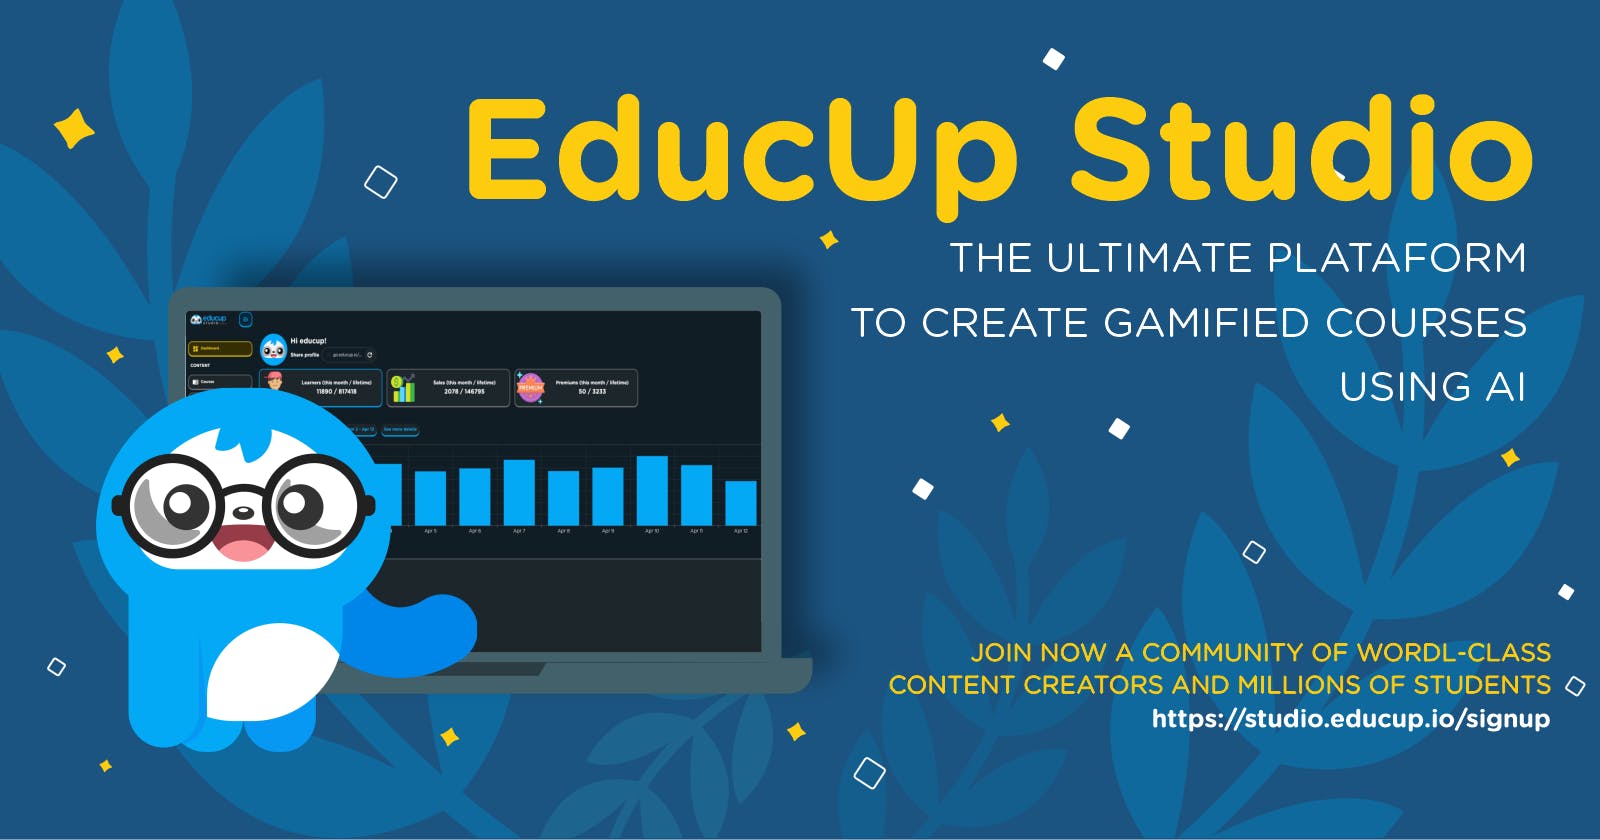 🔥 Introducing the EducUp Studio 💰